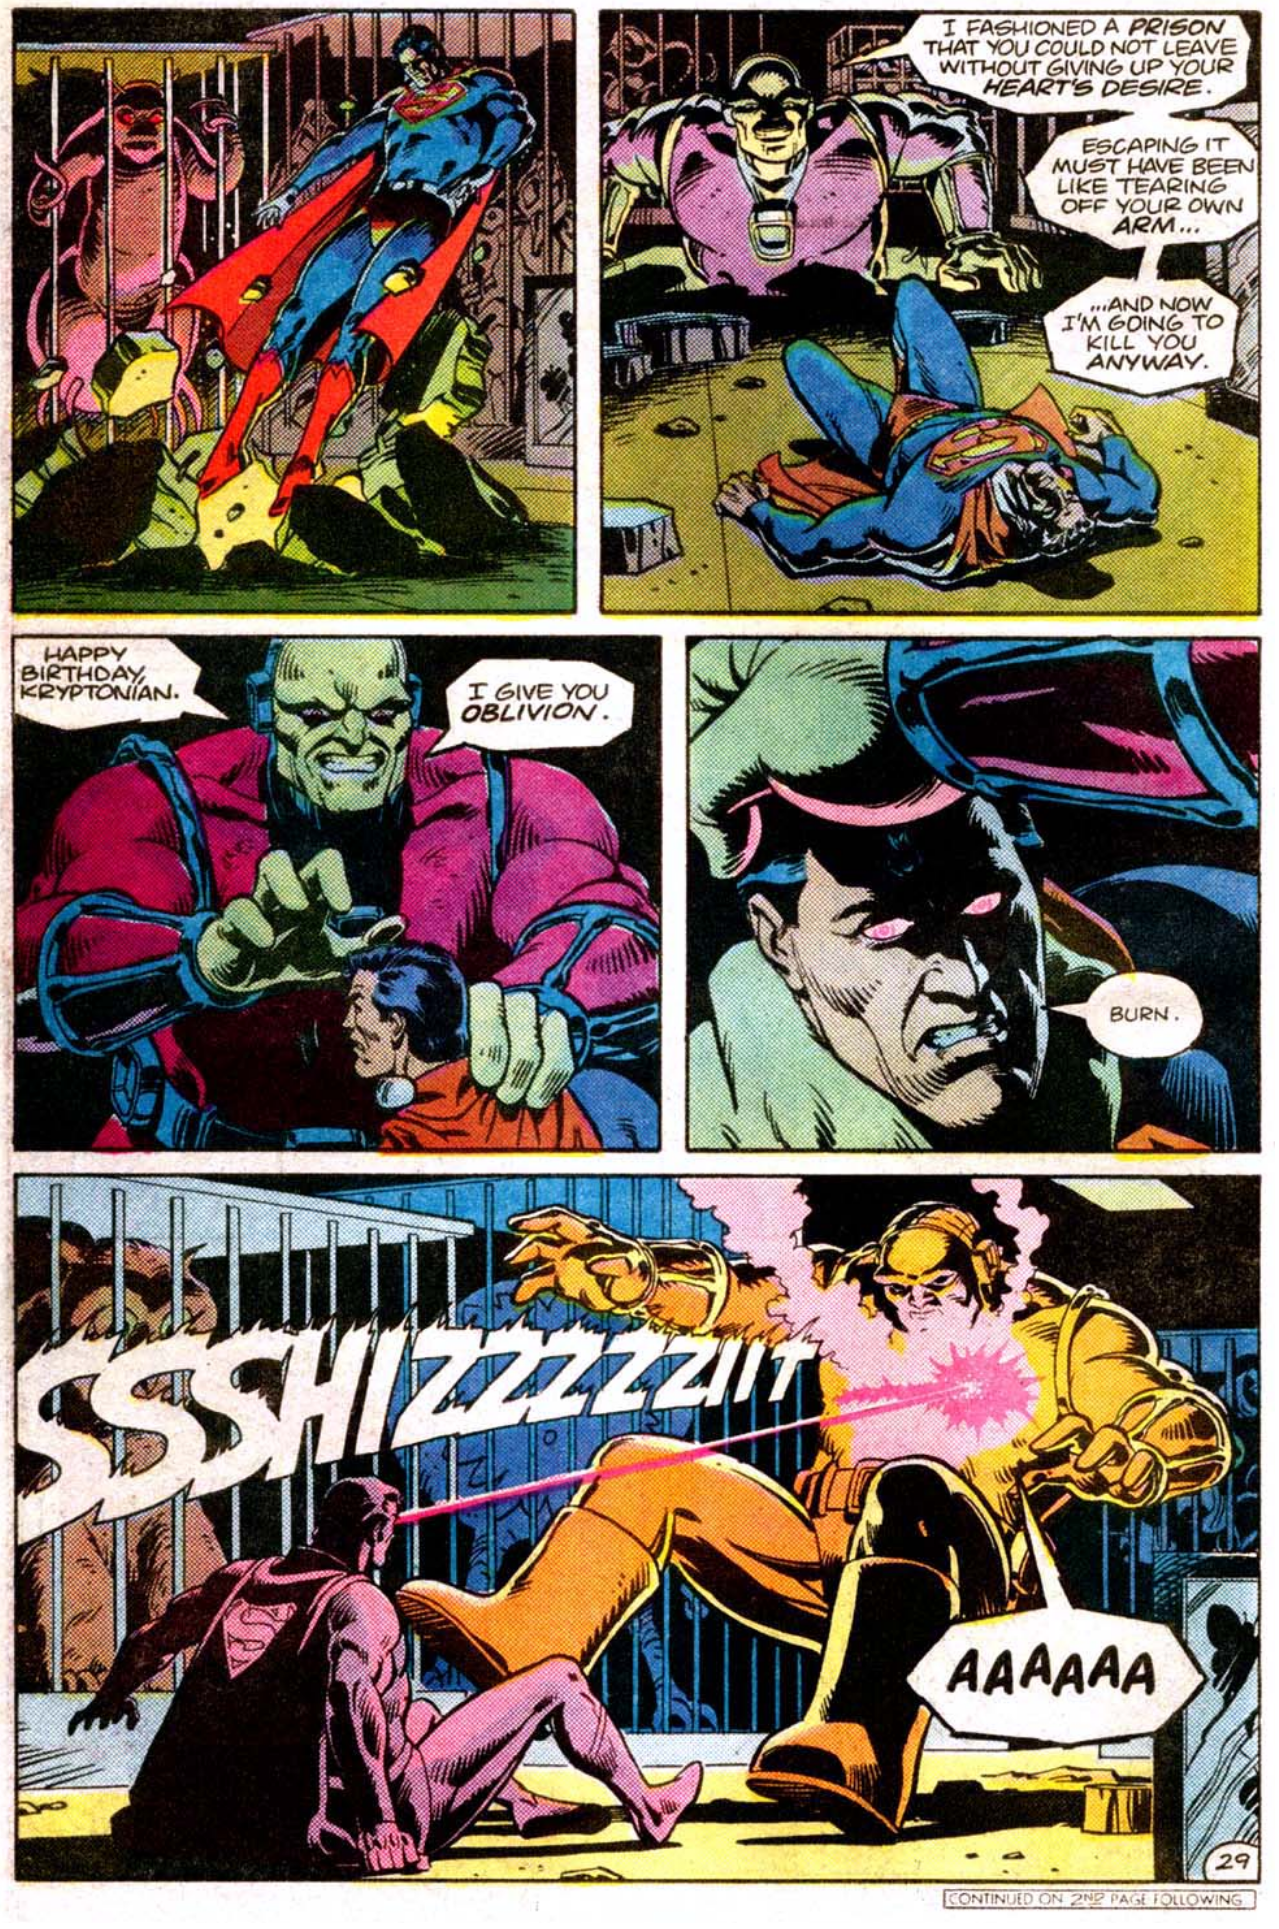 An enraged Superman has had enough of Mongol's machinations in Superman Annual #11 "For the Man Who Has Everything" (1985), DC Comics. Words by Alan Moore, art by Dave Gibbons and Tom Ziuko.